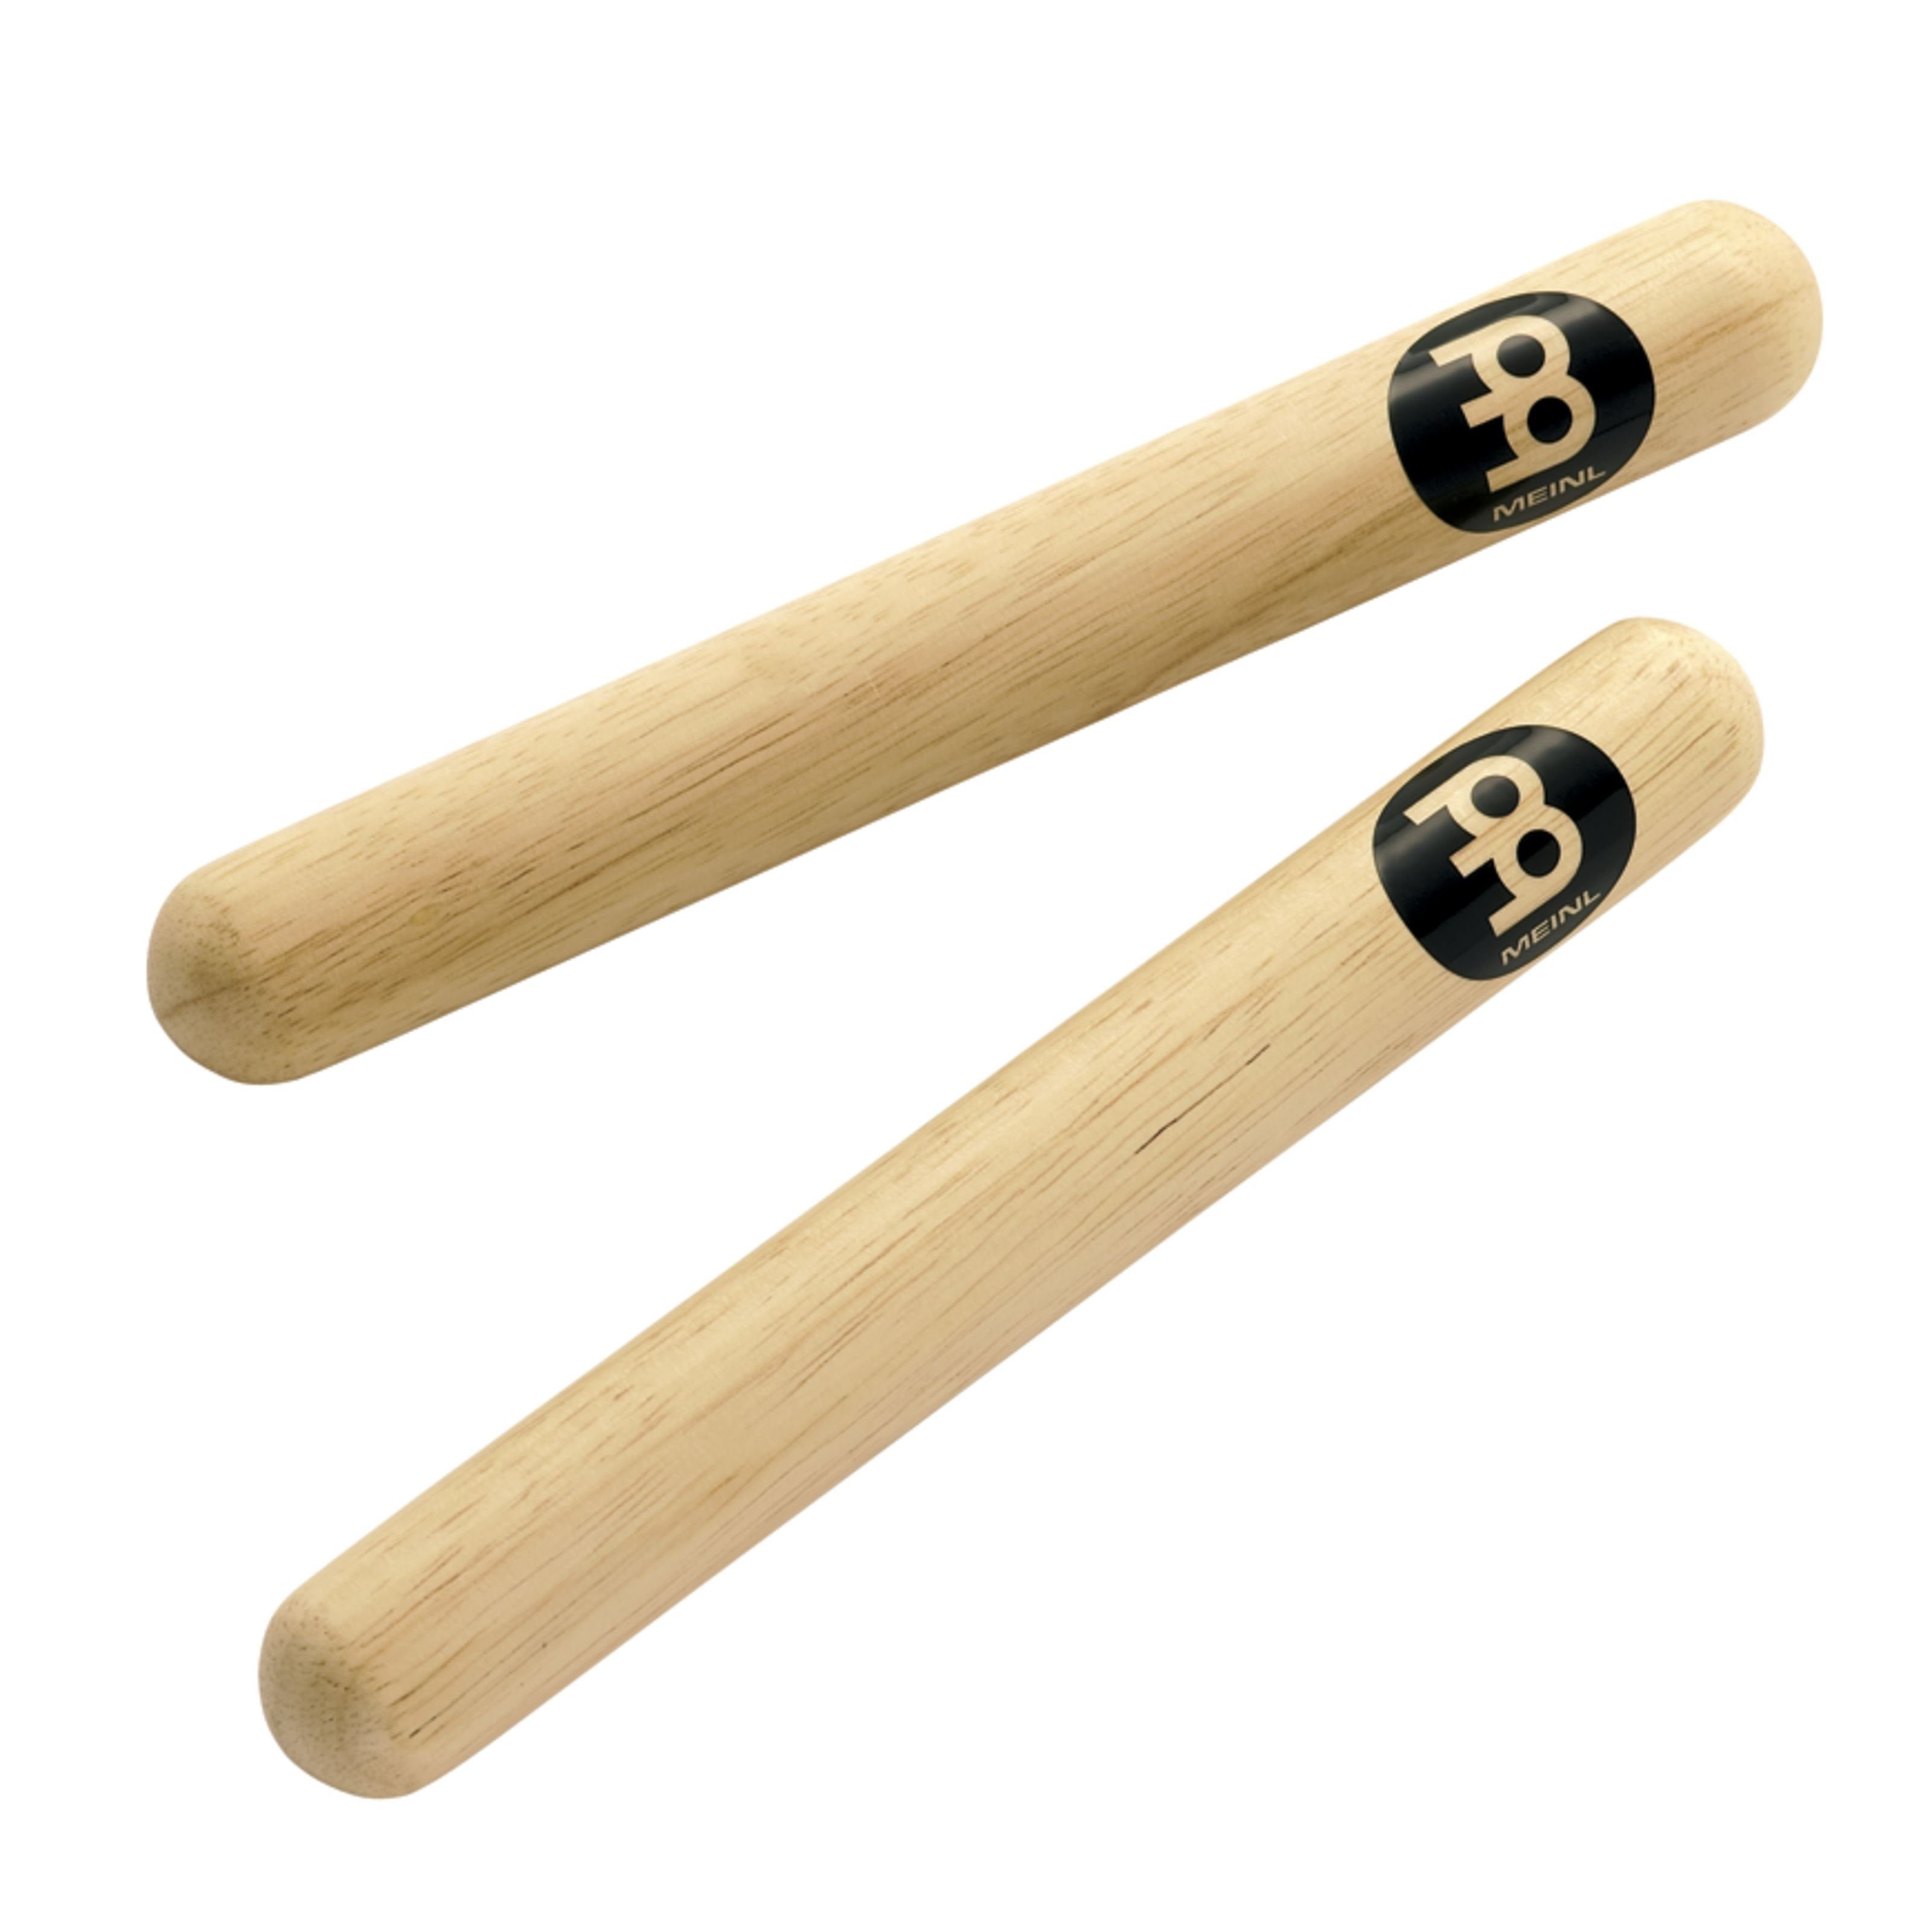 Meinl Percussion Spielzeug-Musikinstrument, CL1HW Claves Hardwood - Claves